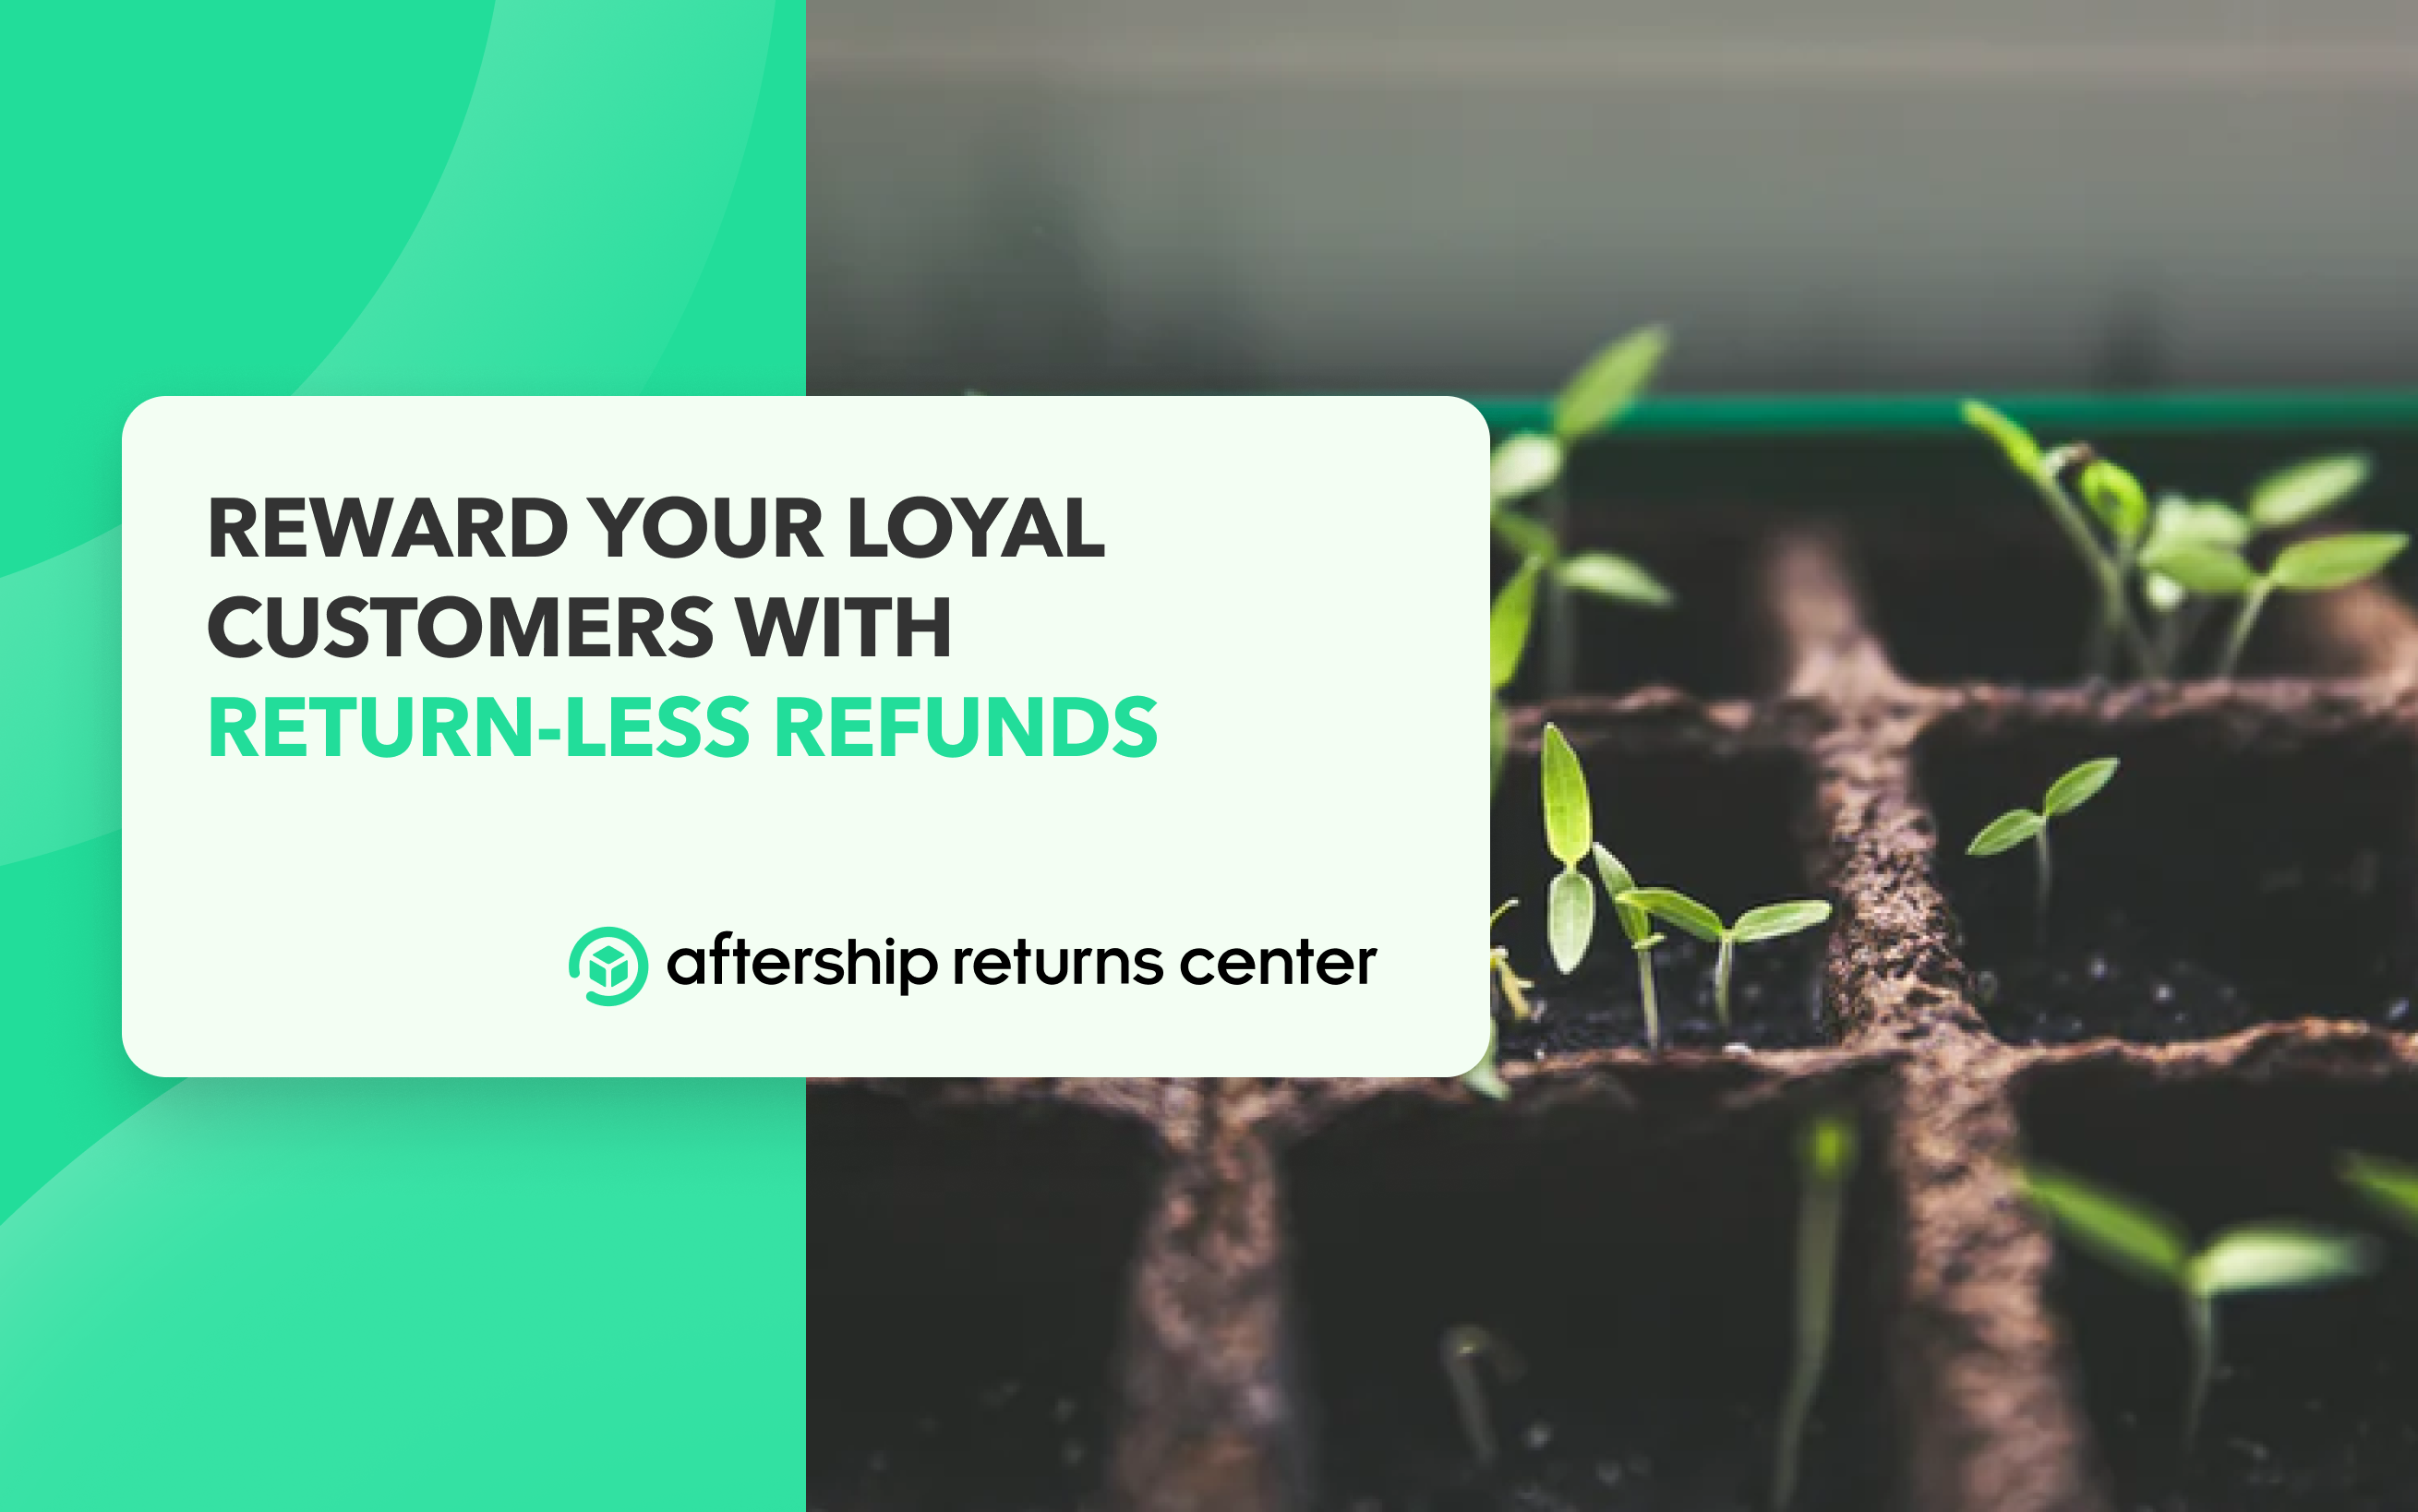 Delight your customers and the planet with “Green returns”